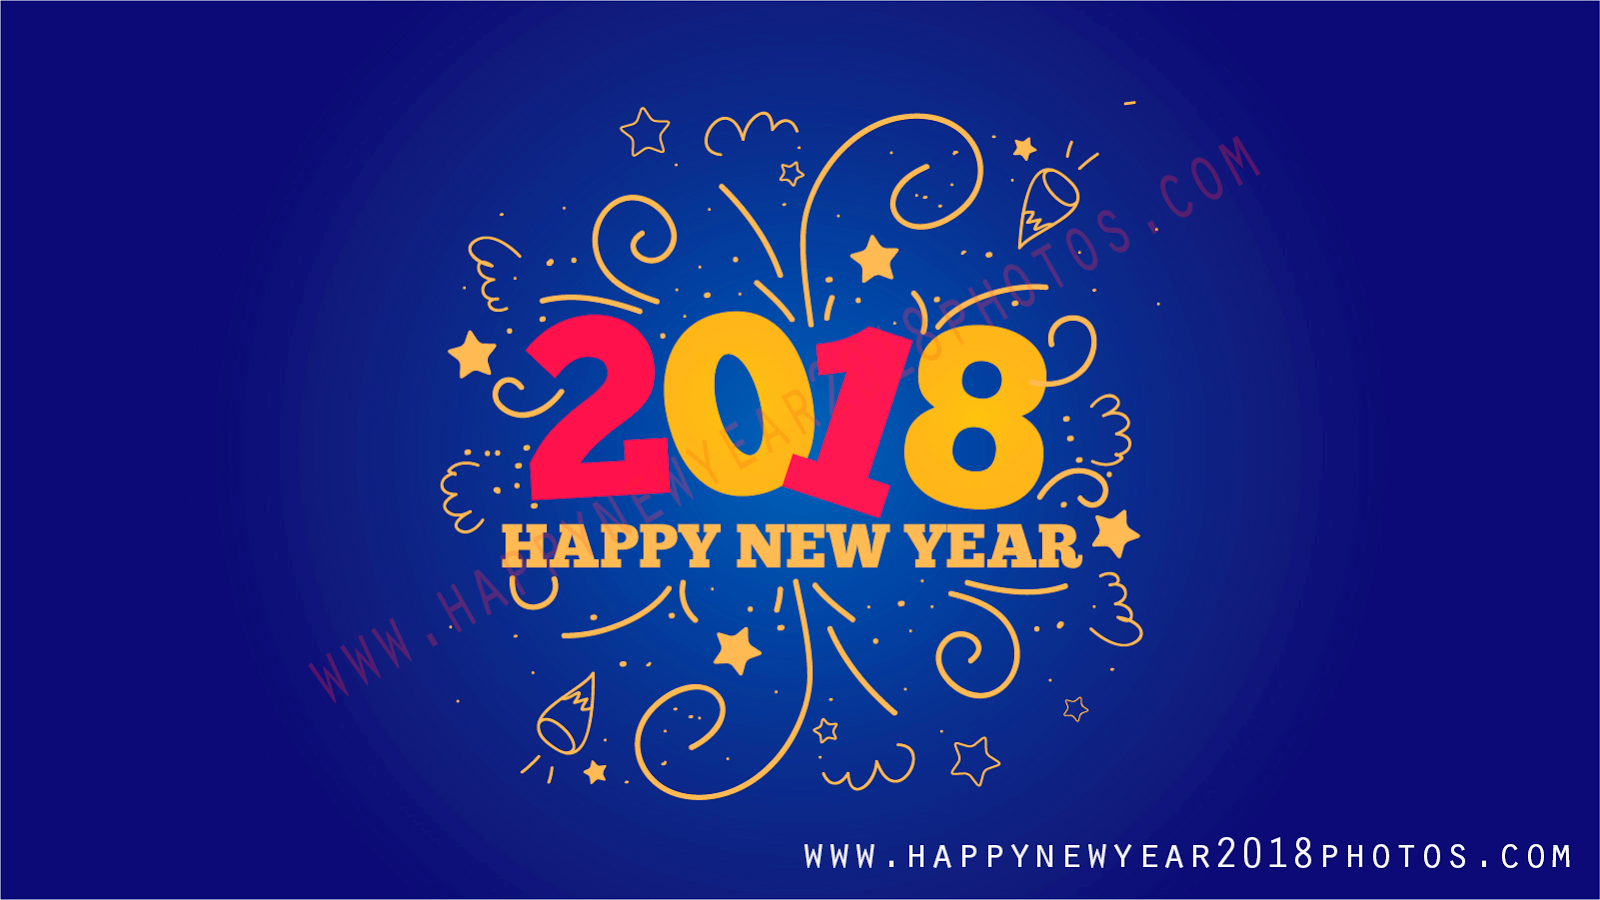 New Year 2018 HD Wallpapers: Happy new year HD photos 2k18 images 